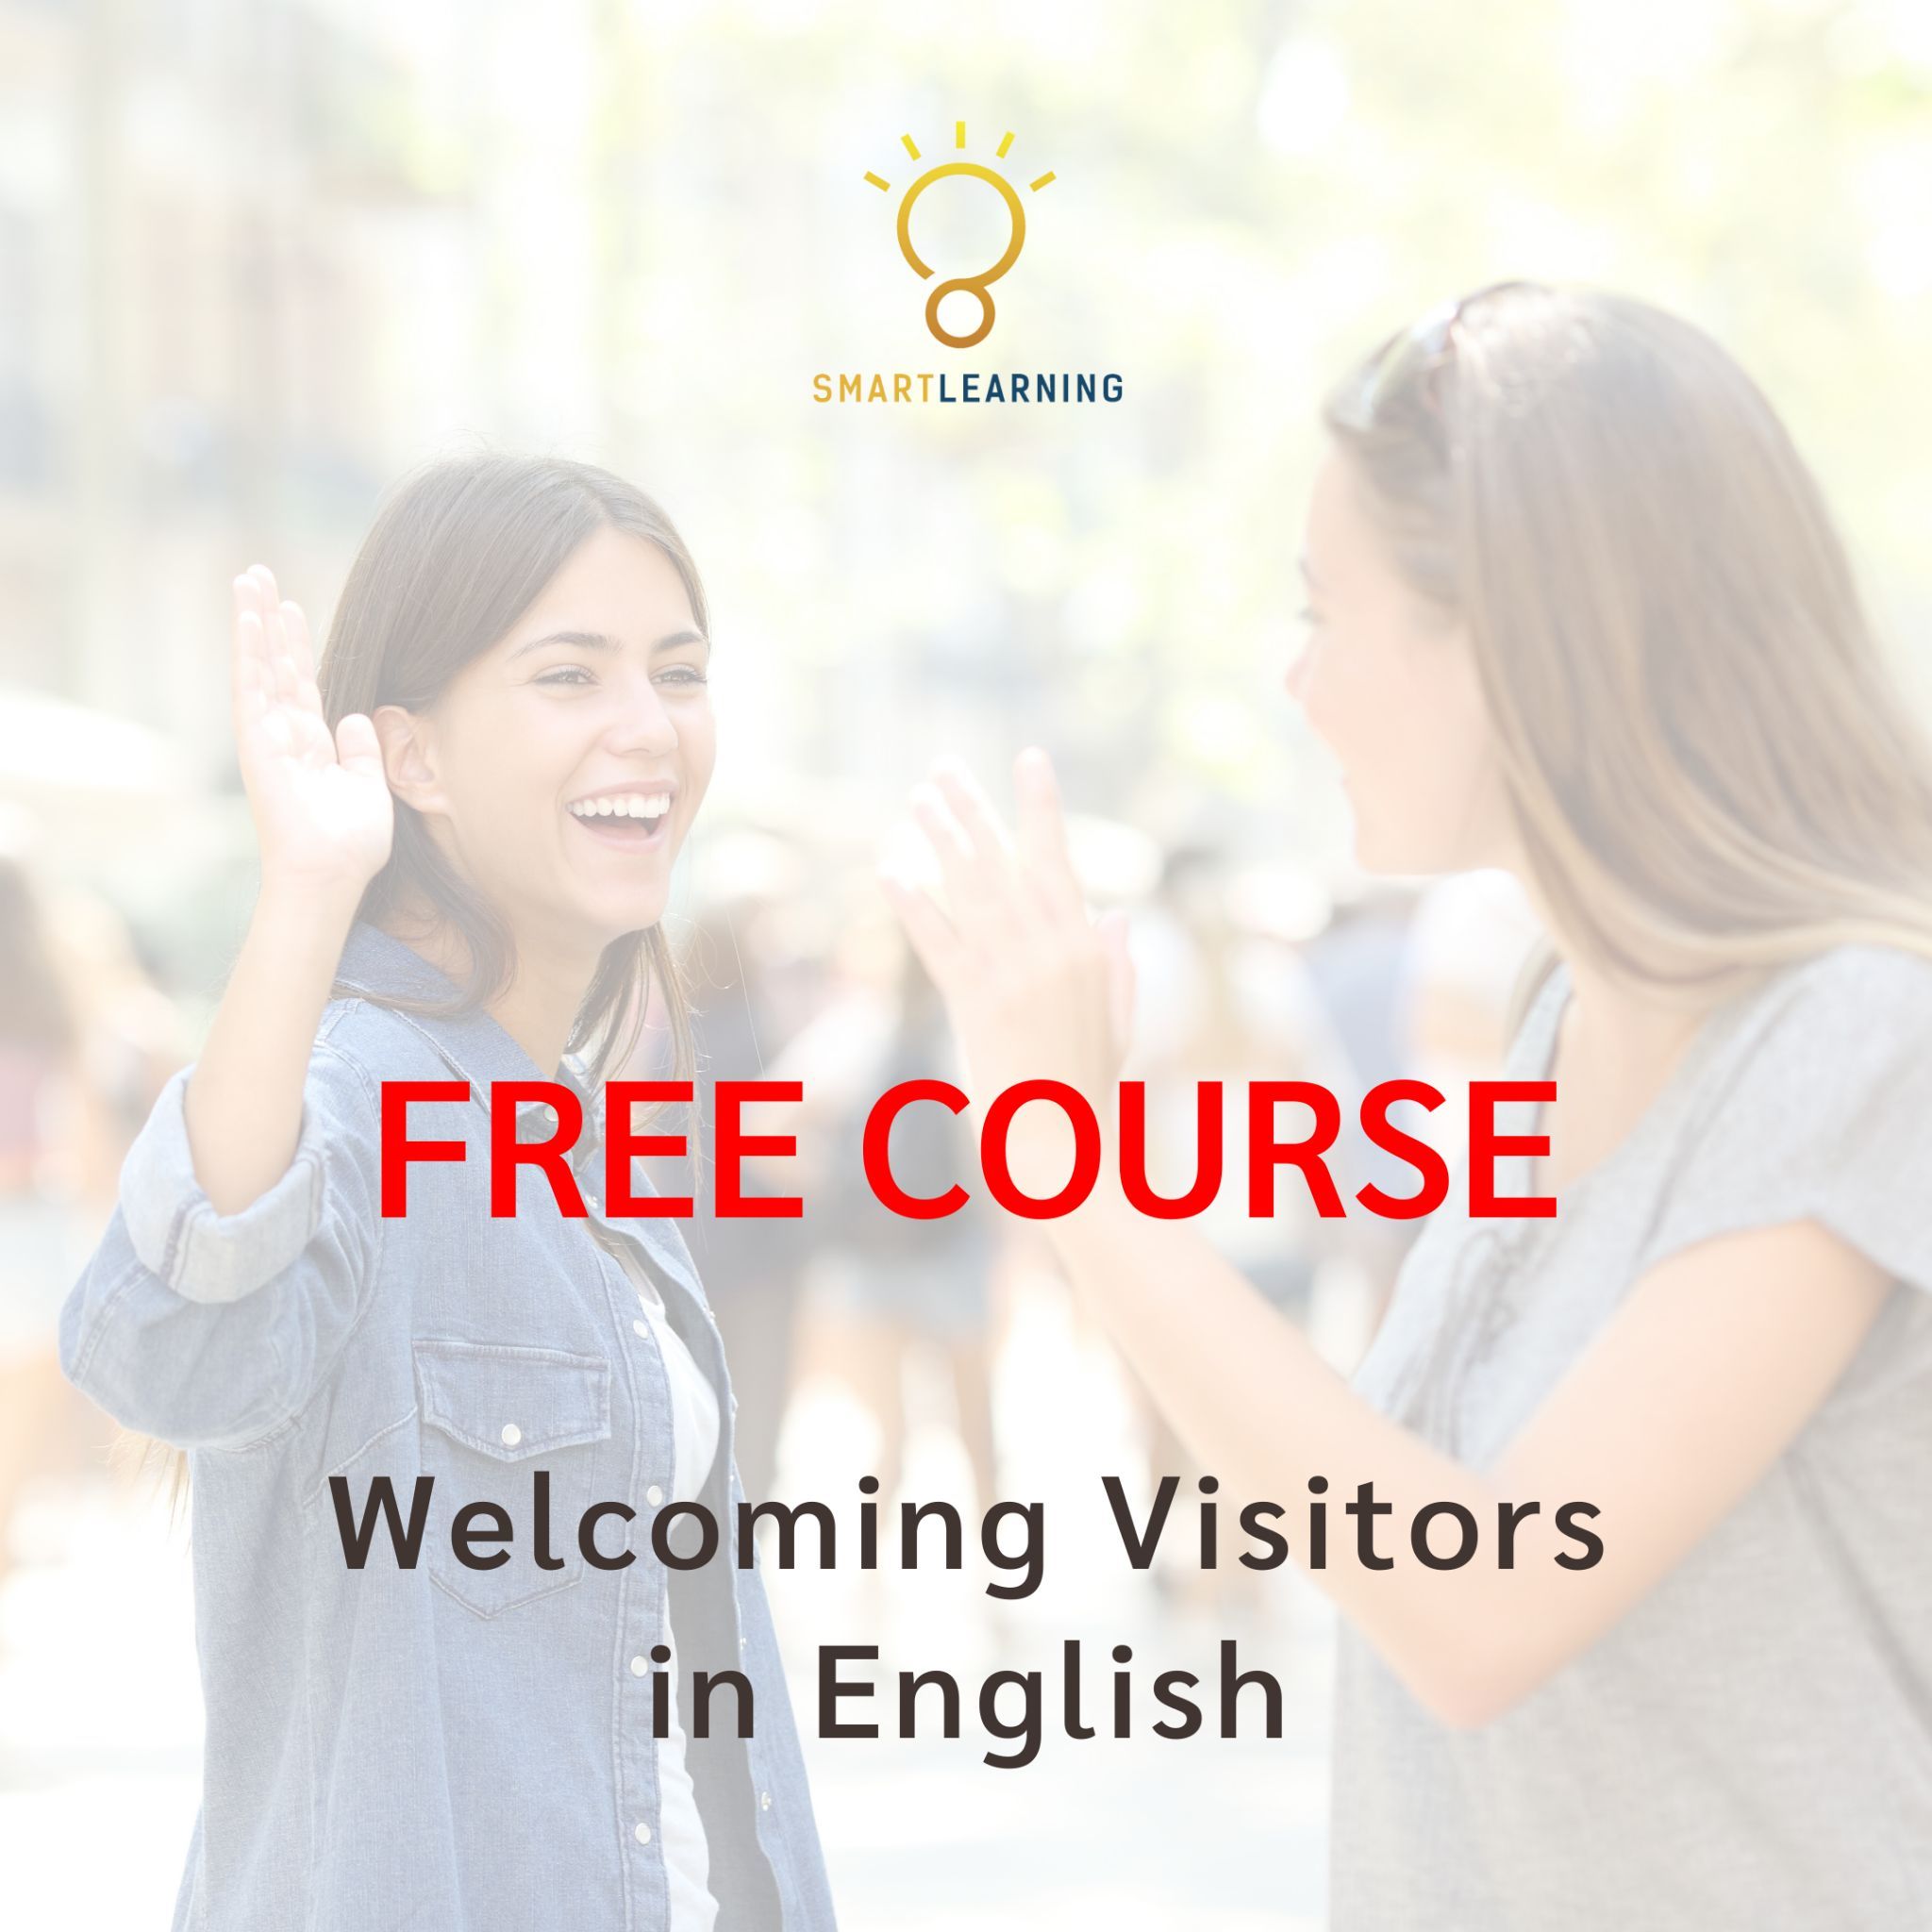 (Free Course) Welcoming Visitors in English